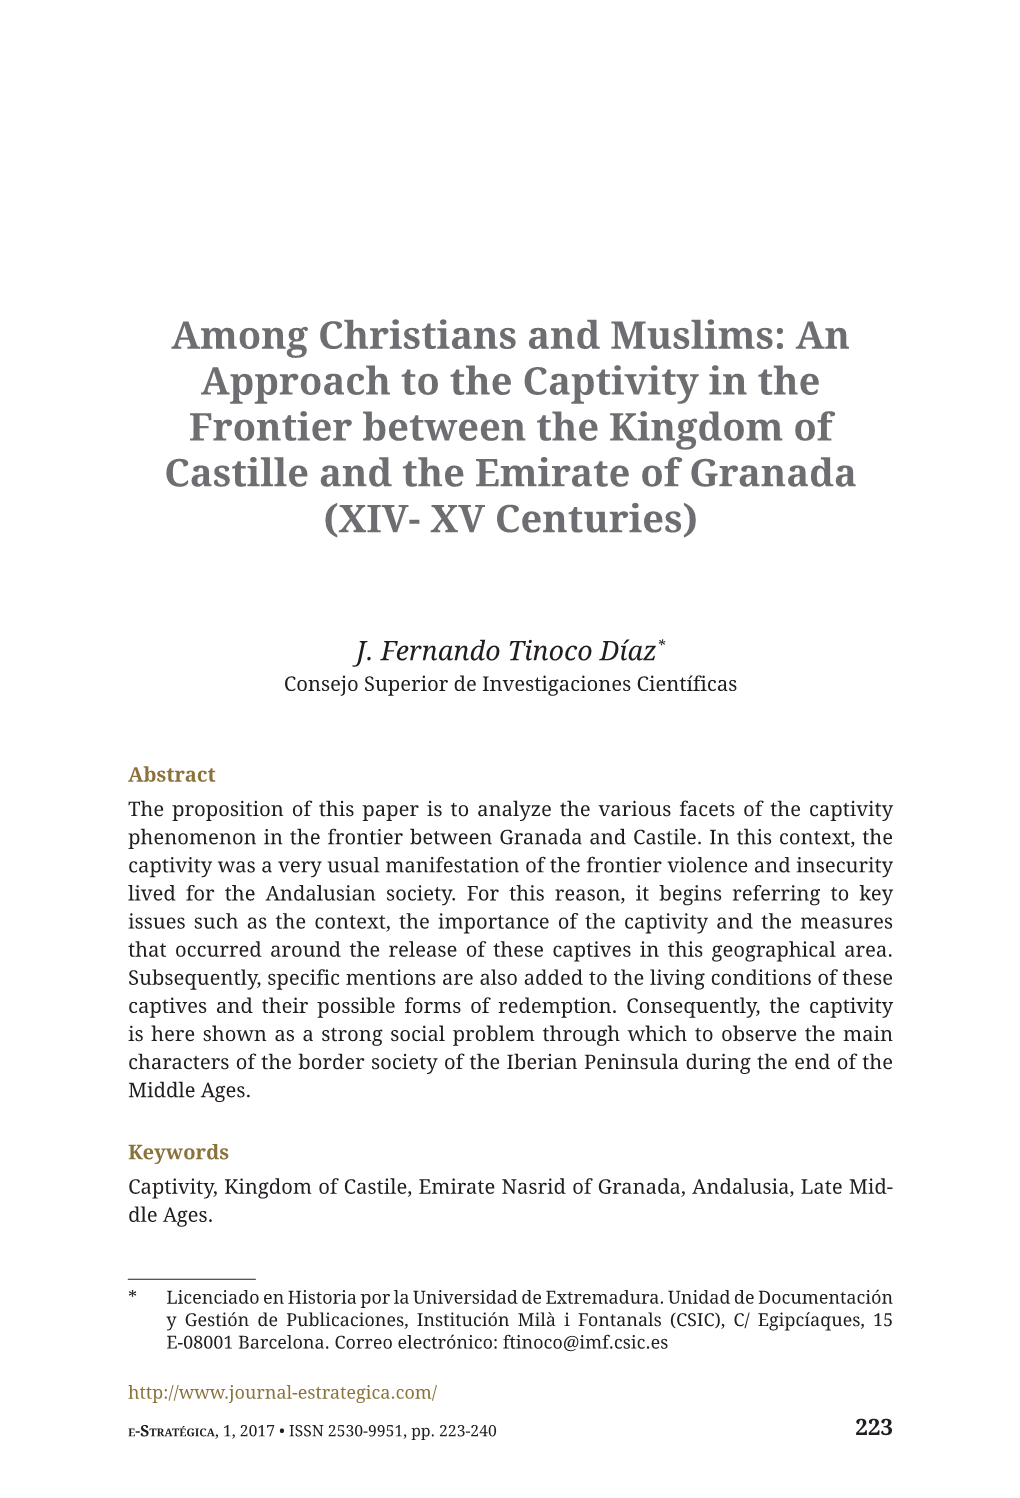 Captivity in the Frontier Between the Kingdom of Castille and the Emirate of Granada (XIV- XV Centuries)